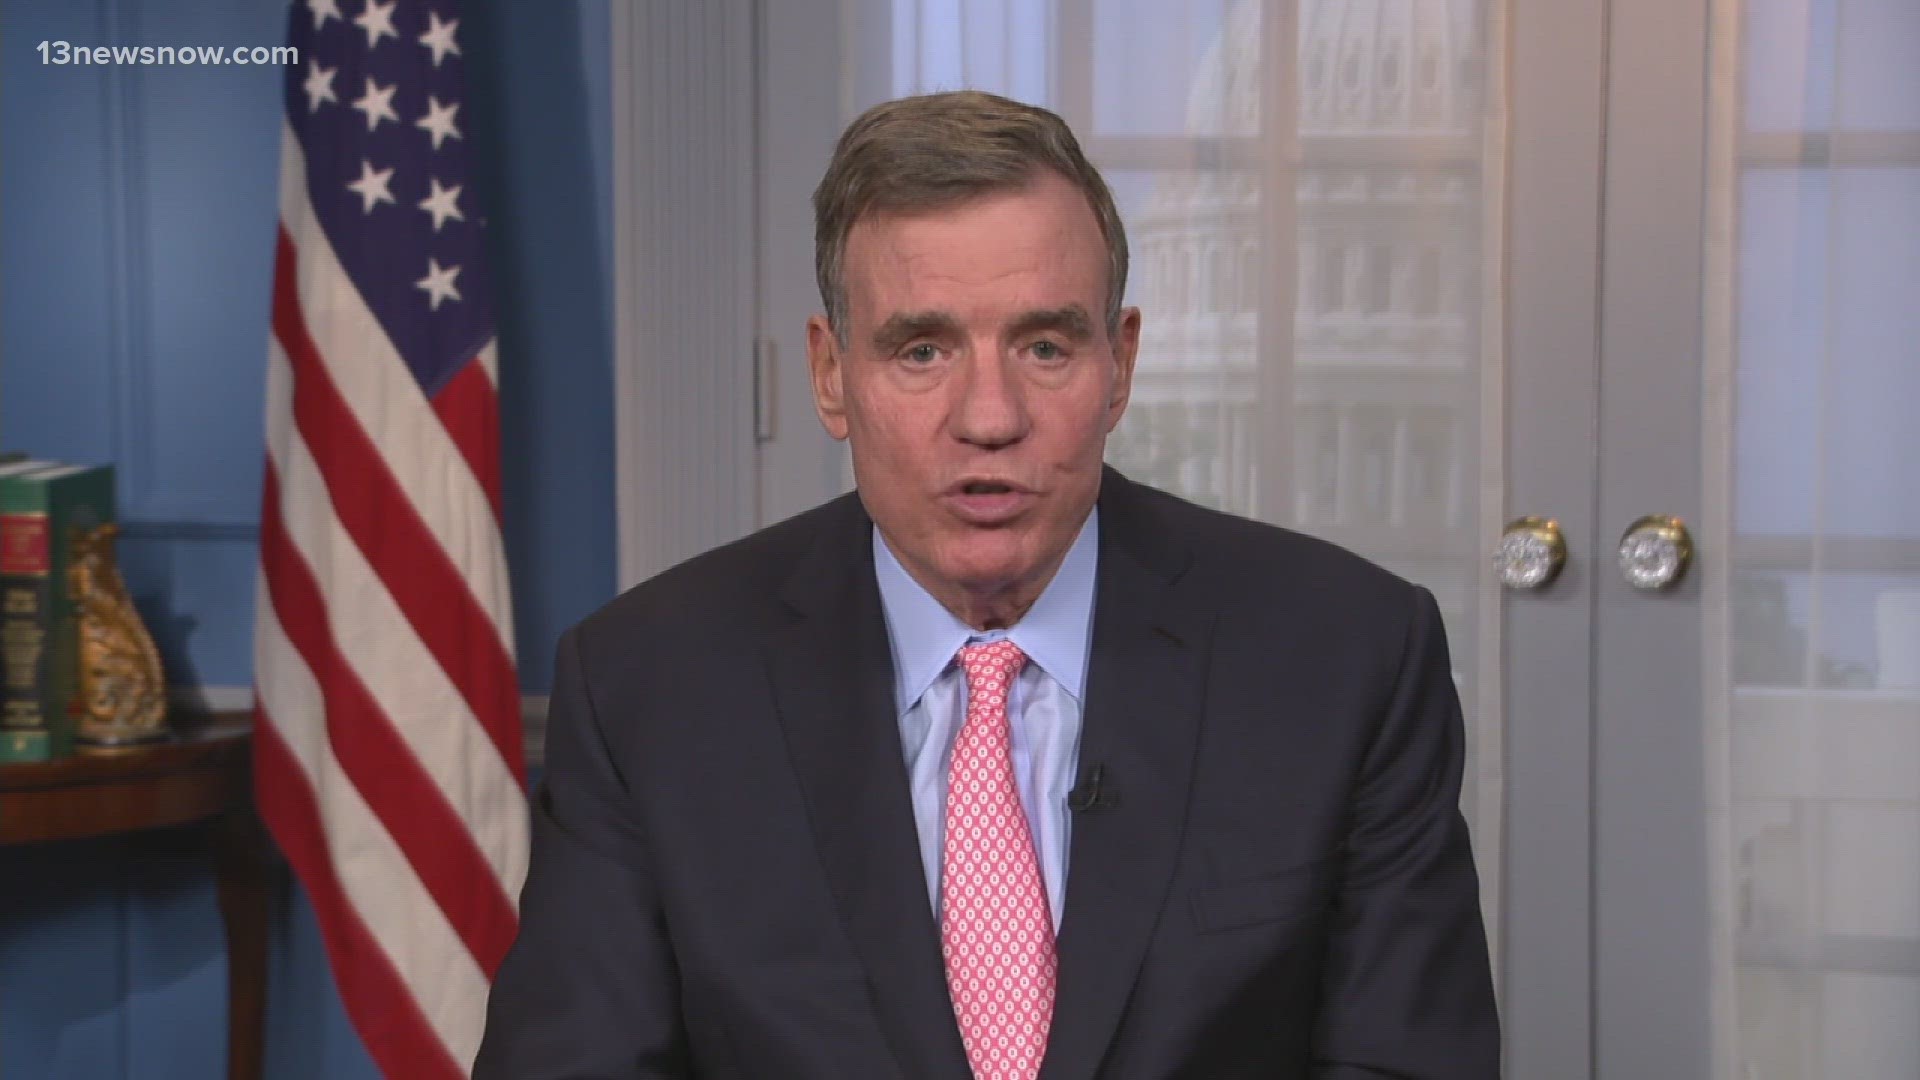 The U.S. response to the deadly drone attack in Jordan was "very appropriate," according to Virginia U.S. Sen. Mark Warner.